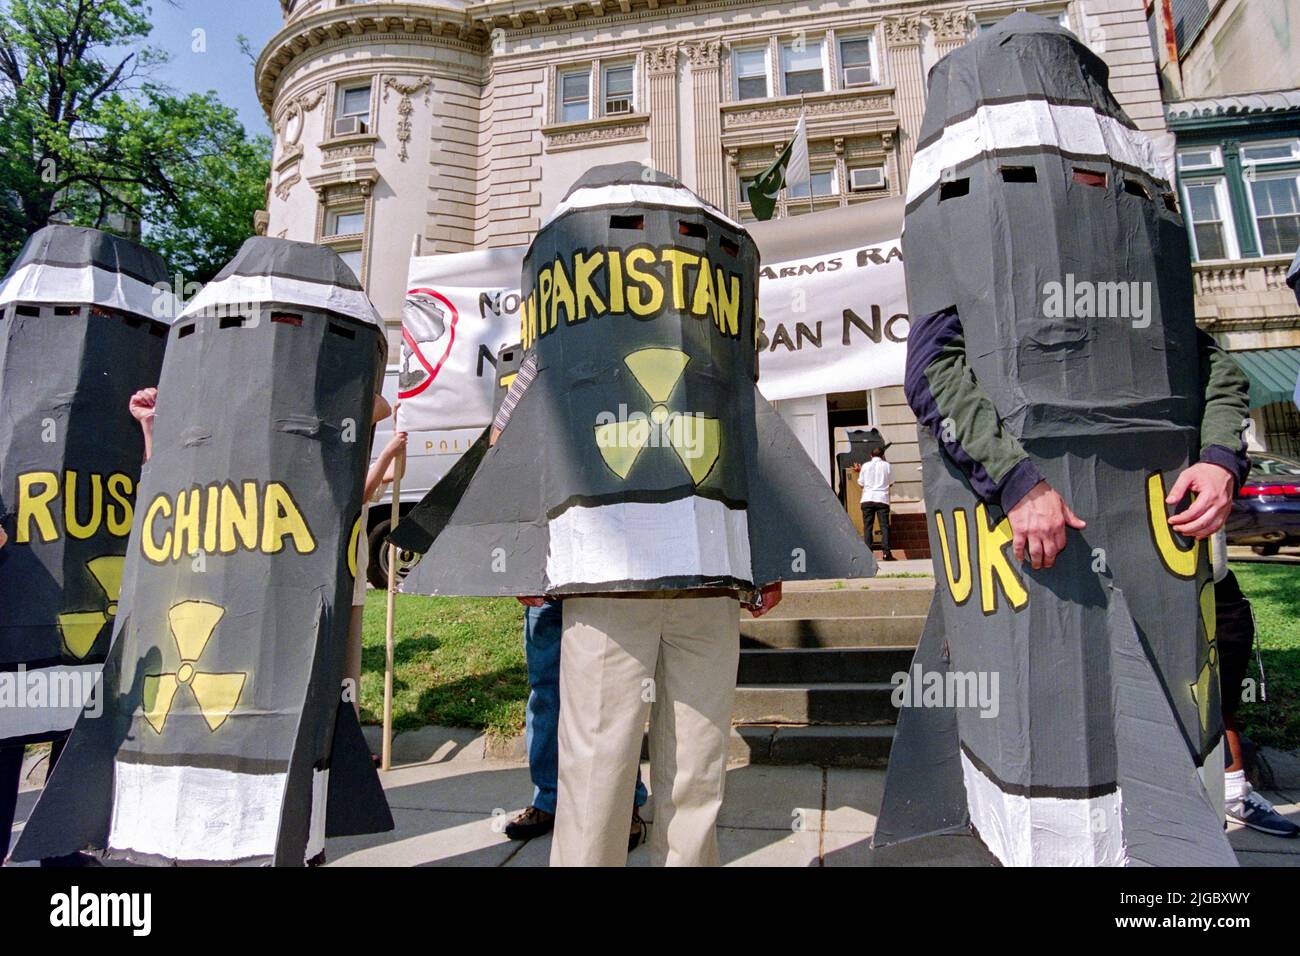 Greenpeace protestors, wearing bomb costumes, rally outside the Embassy of Pakistan, May 28, 1998 in Washington, DC. The protesters called for an end to nuclear arms race which has increased with Pakistan joining nuclear armed nations. Stock Photo